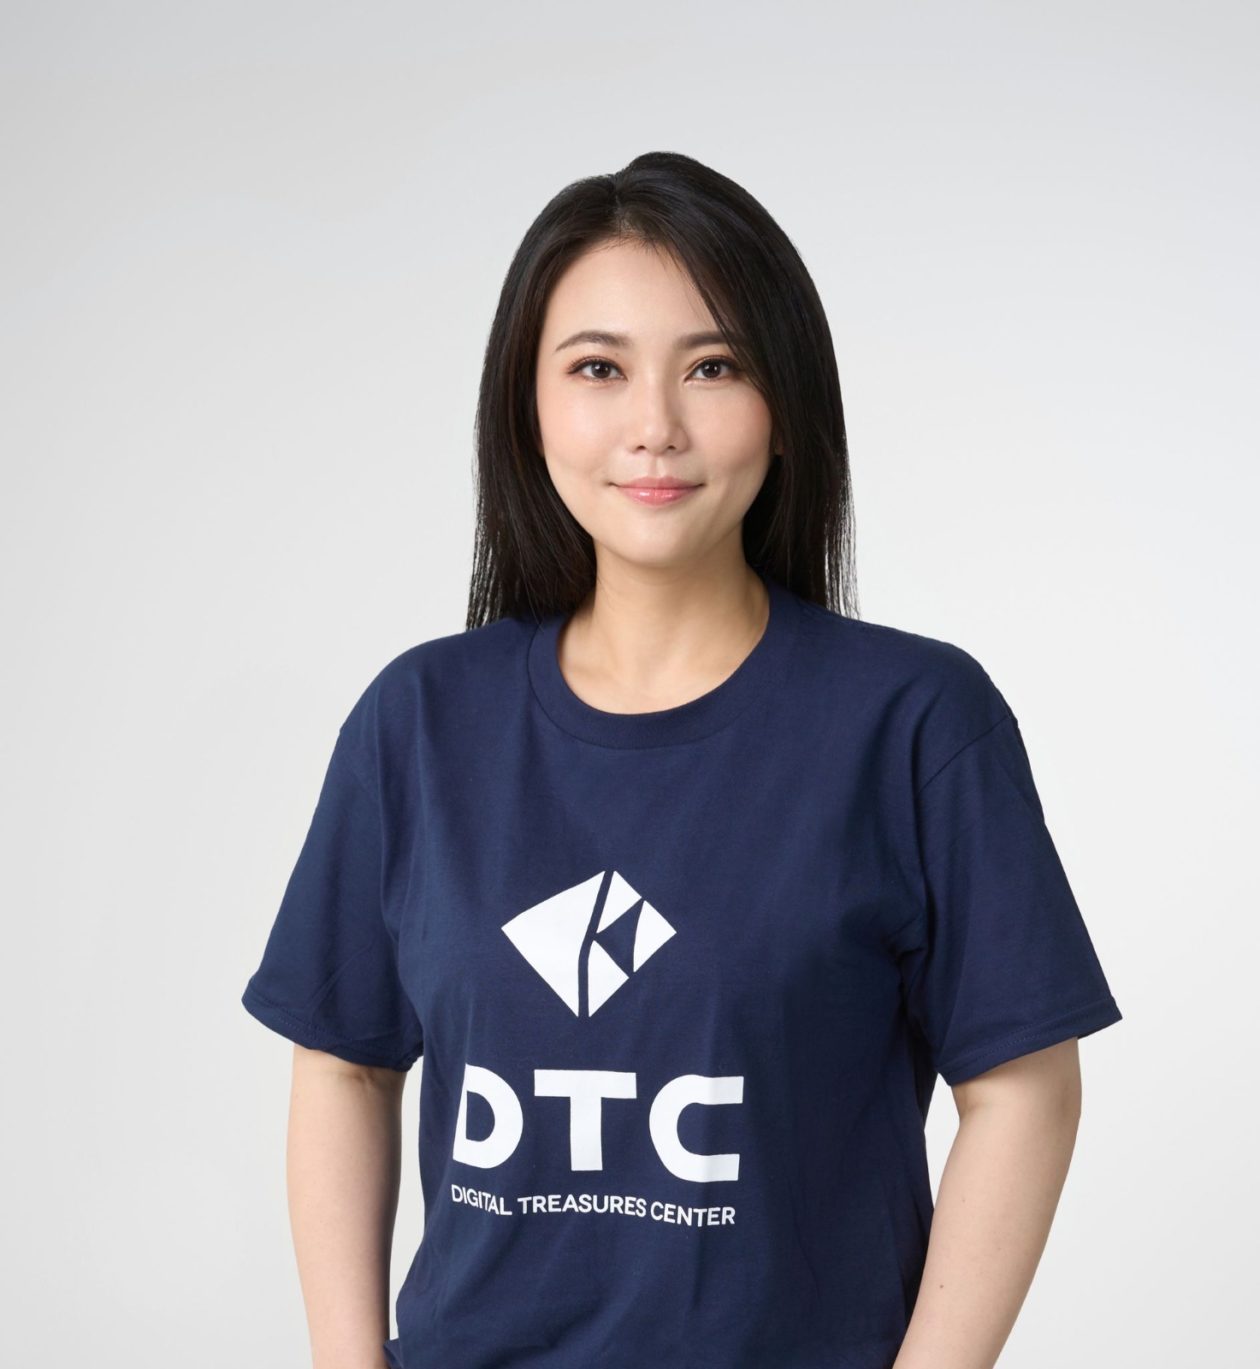 Alice Liu, chief executive and founder of DTC, wins Singapore's latest crypto service license